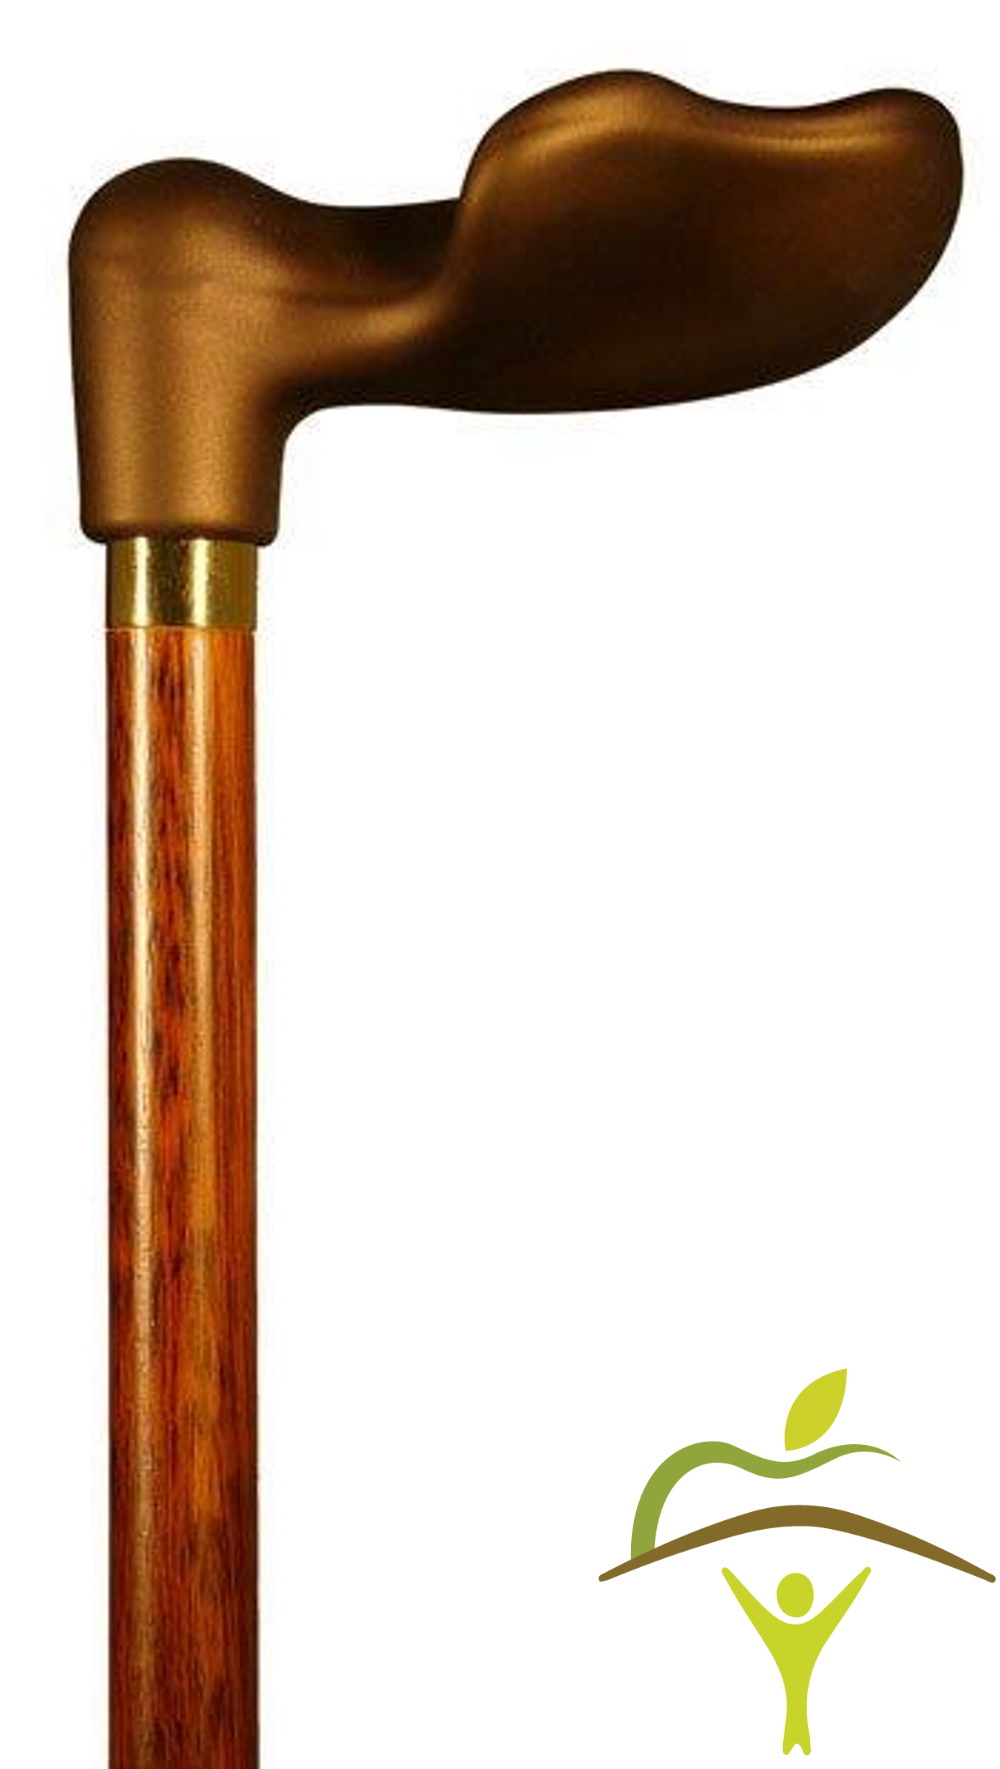 Finna Walking Stick Soft Touch Anatomical Handle Free Home Delivery Homecare Webshop 2993